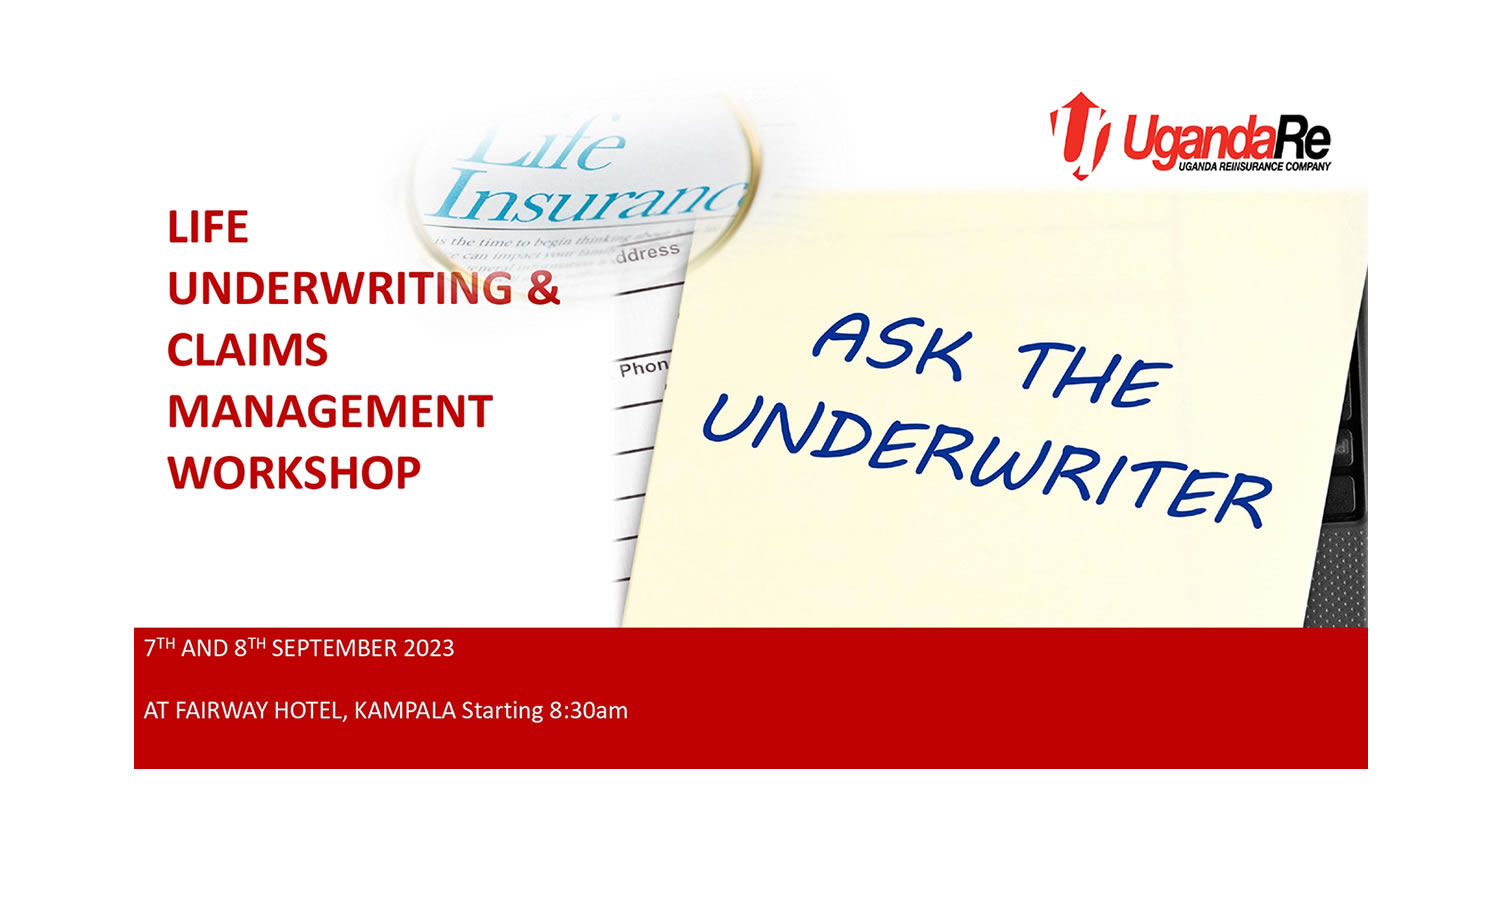 LIFE UNDERWRITING AND CLAIMS MANAGEMENT WORKSHOP 7TH – 8TH SEPTEMBER 2023 at Fairway Hotel, Kampala